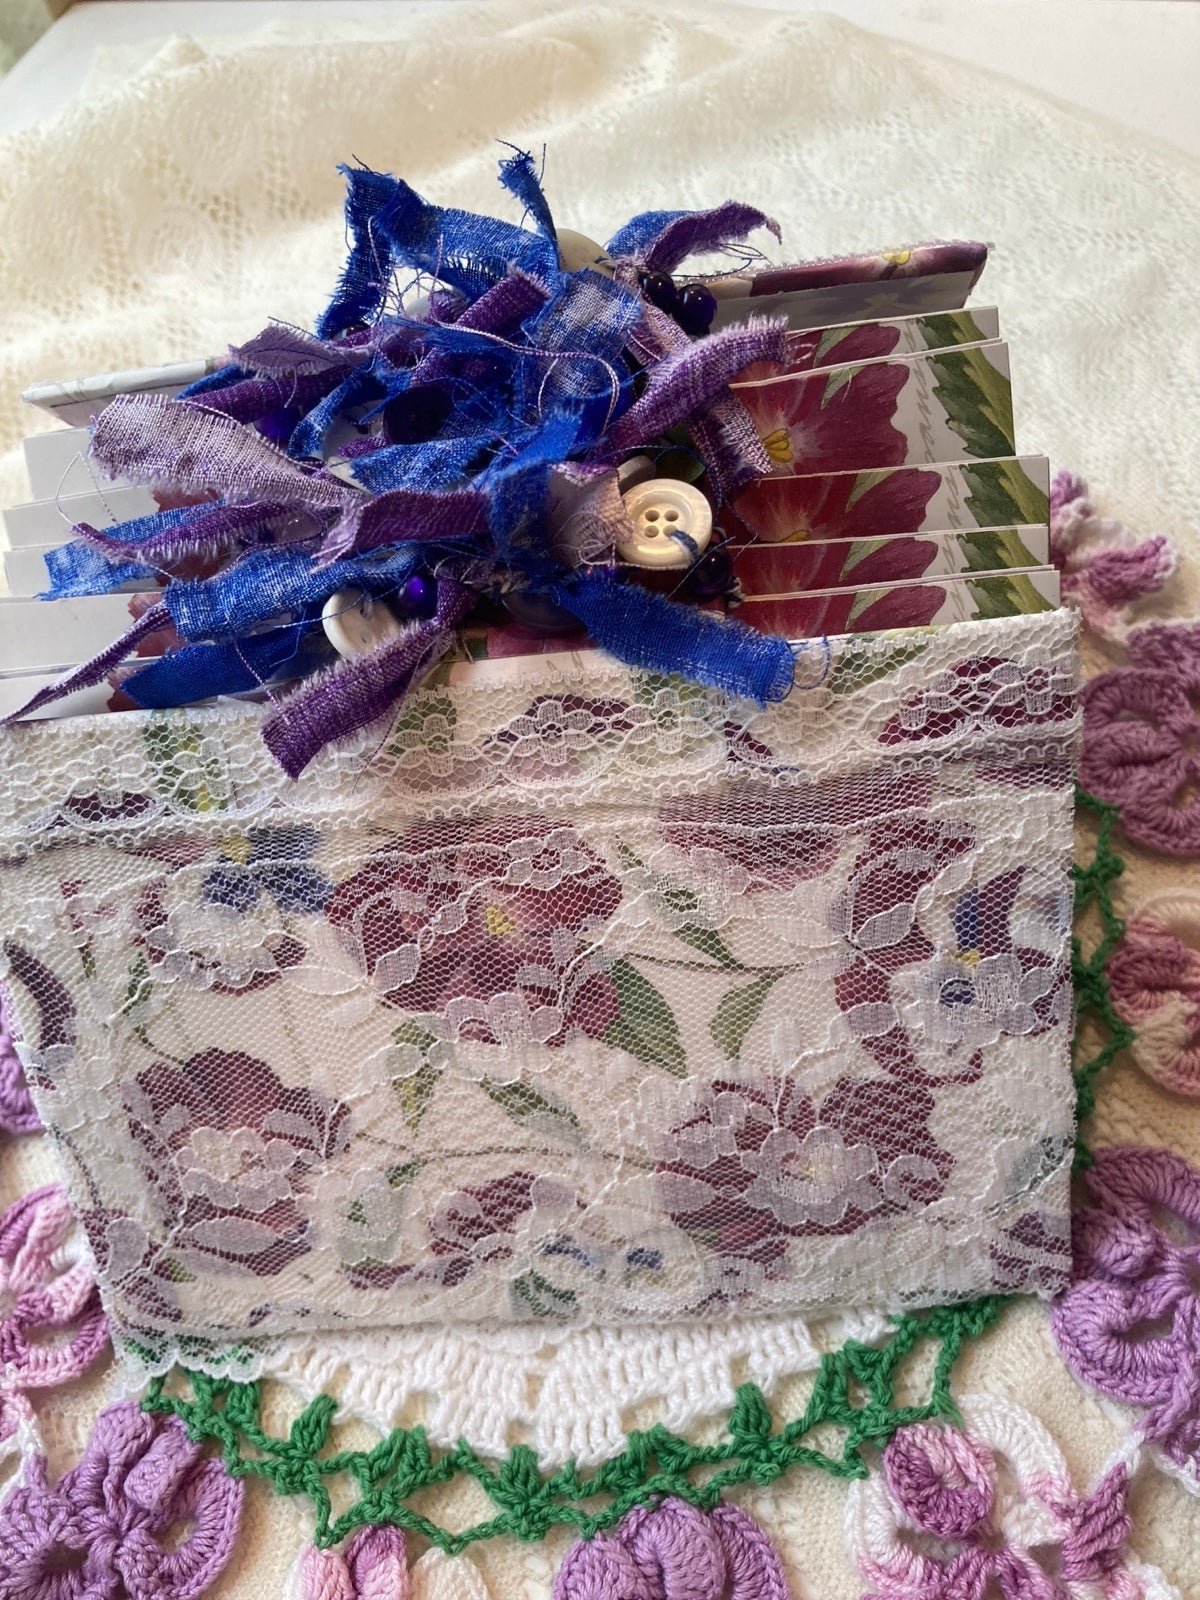 Junk Journal Beautiful Spring Lacy Pansy Diary 2Hem7gwy